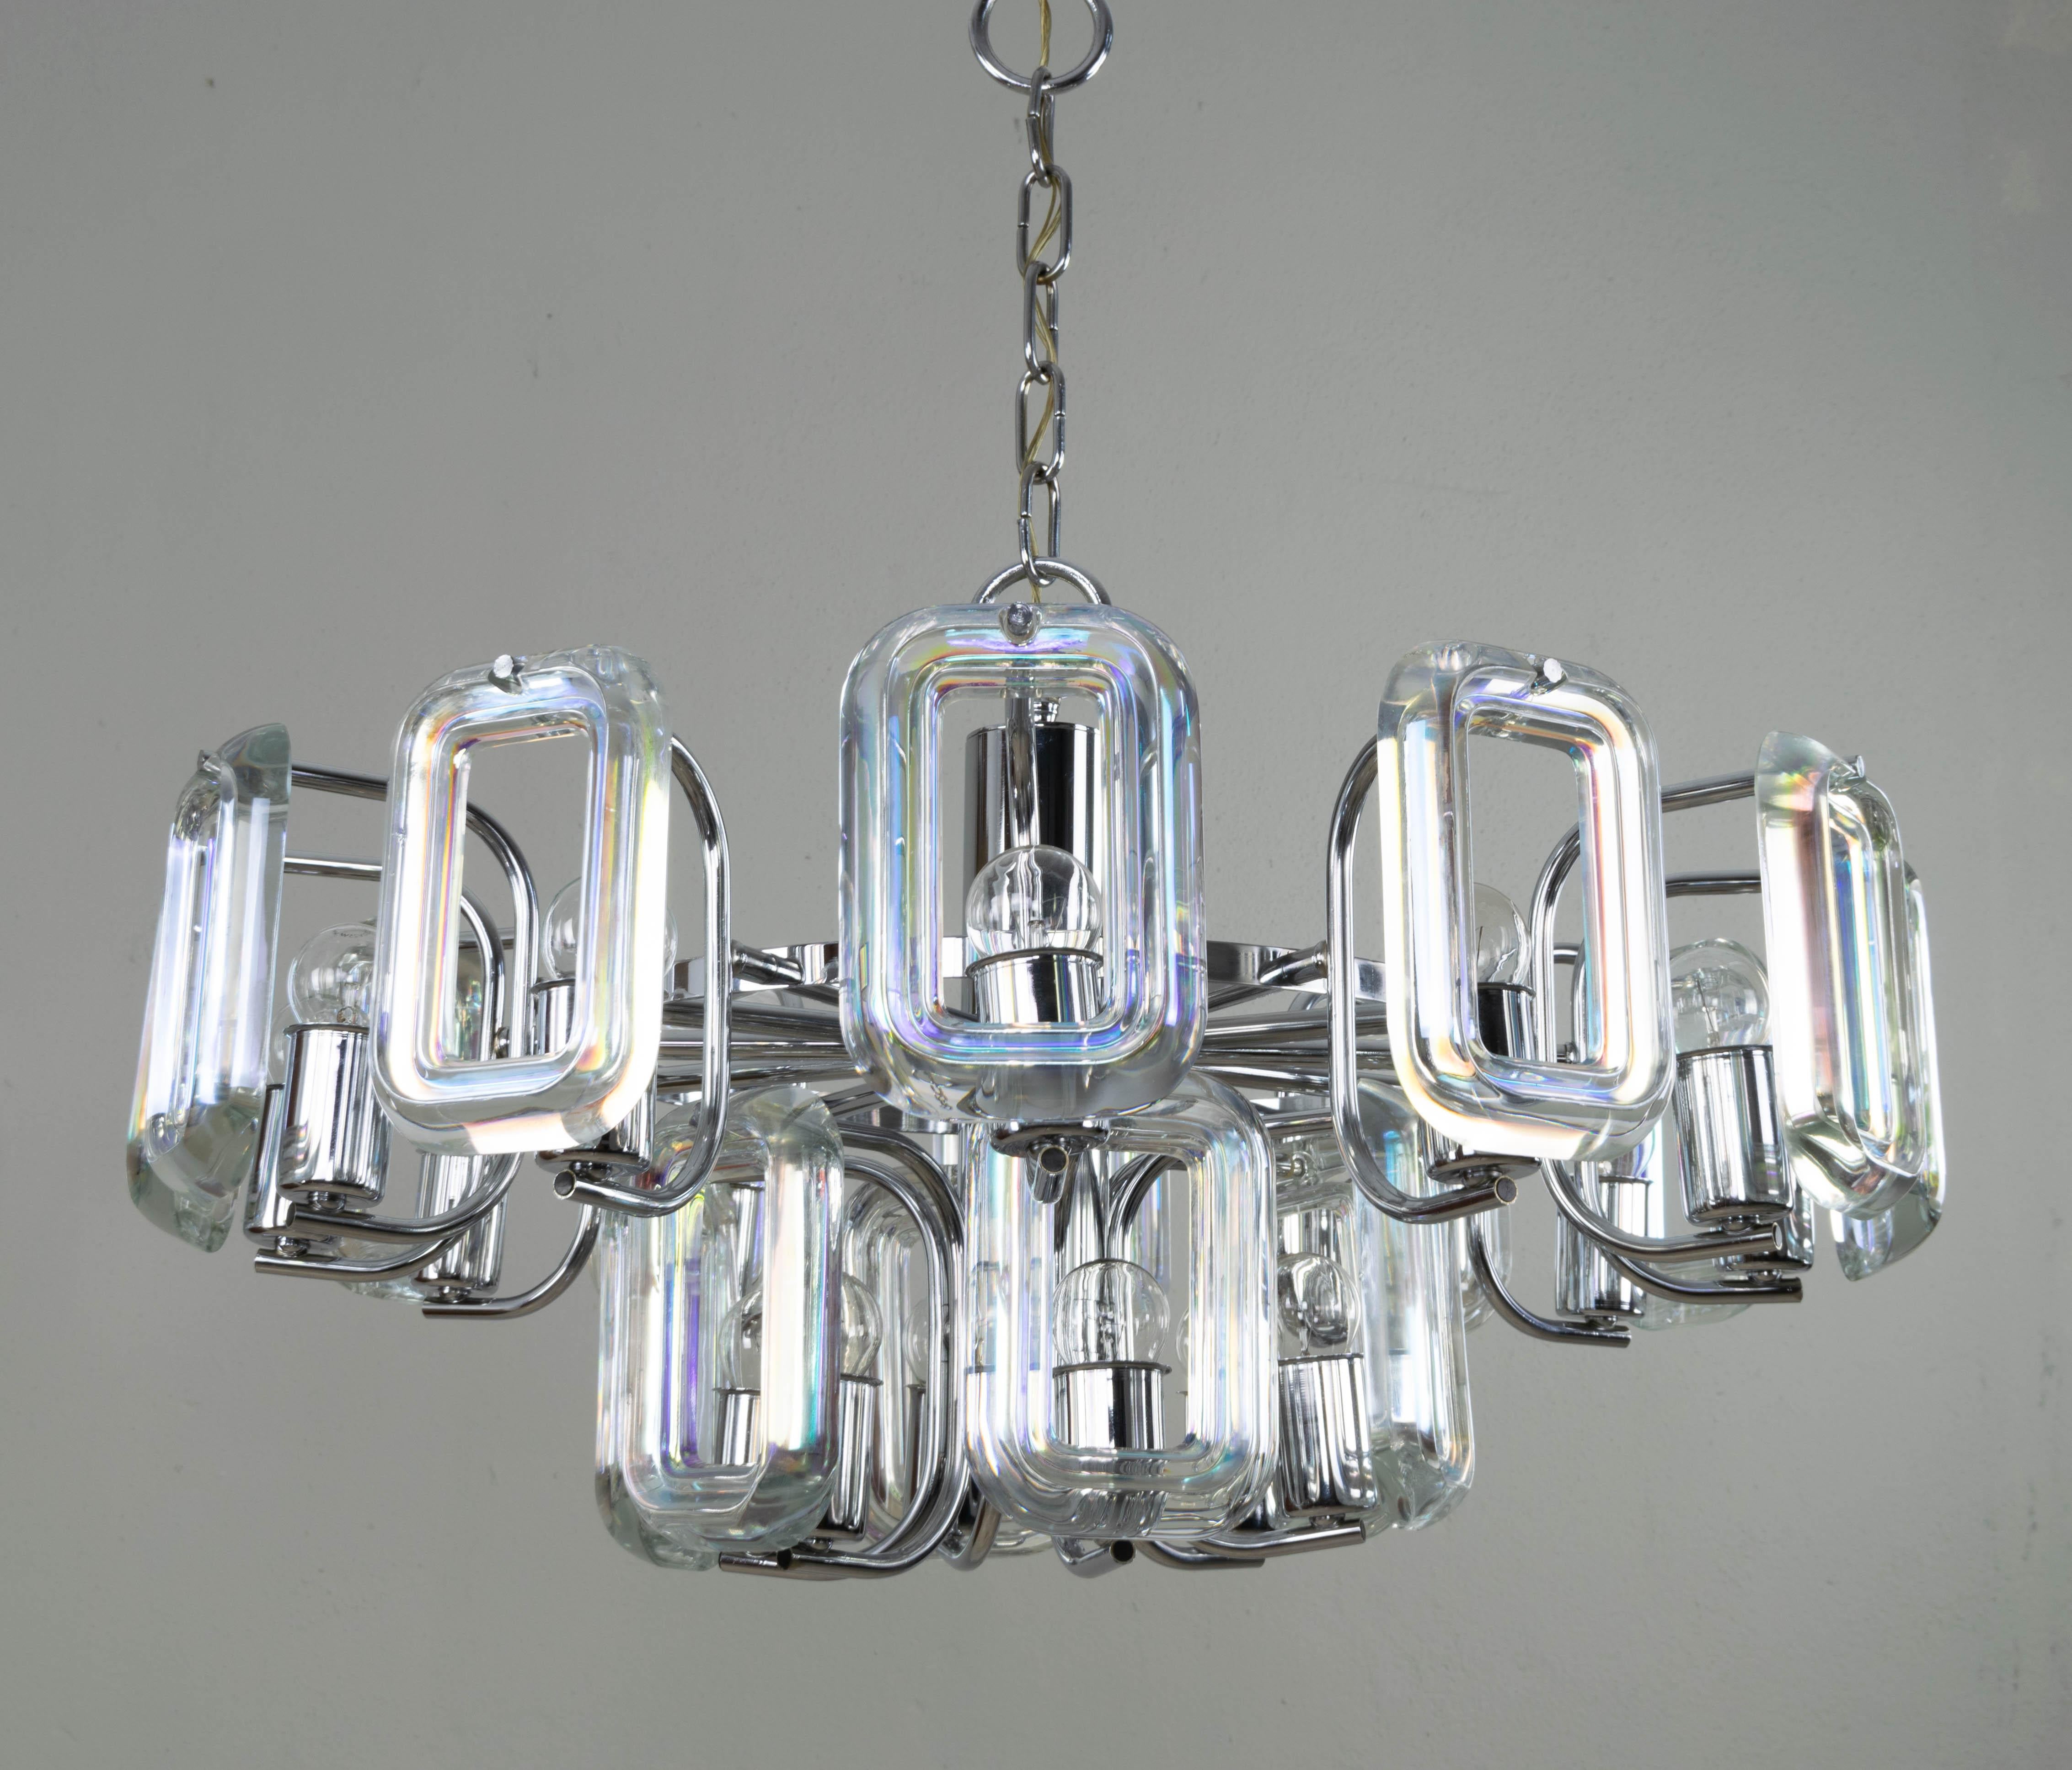 20th Century Large Set of Chandelier and Sconces of Italian Modern Iridescent Glass Links